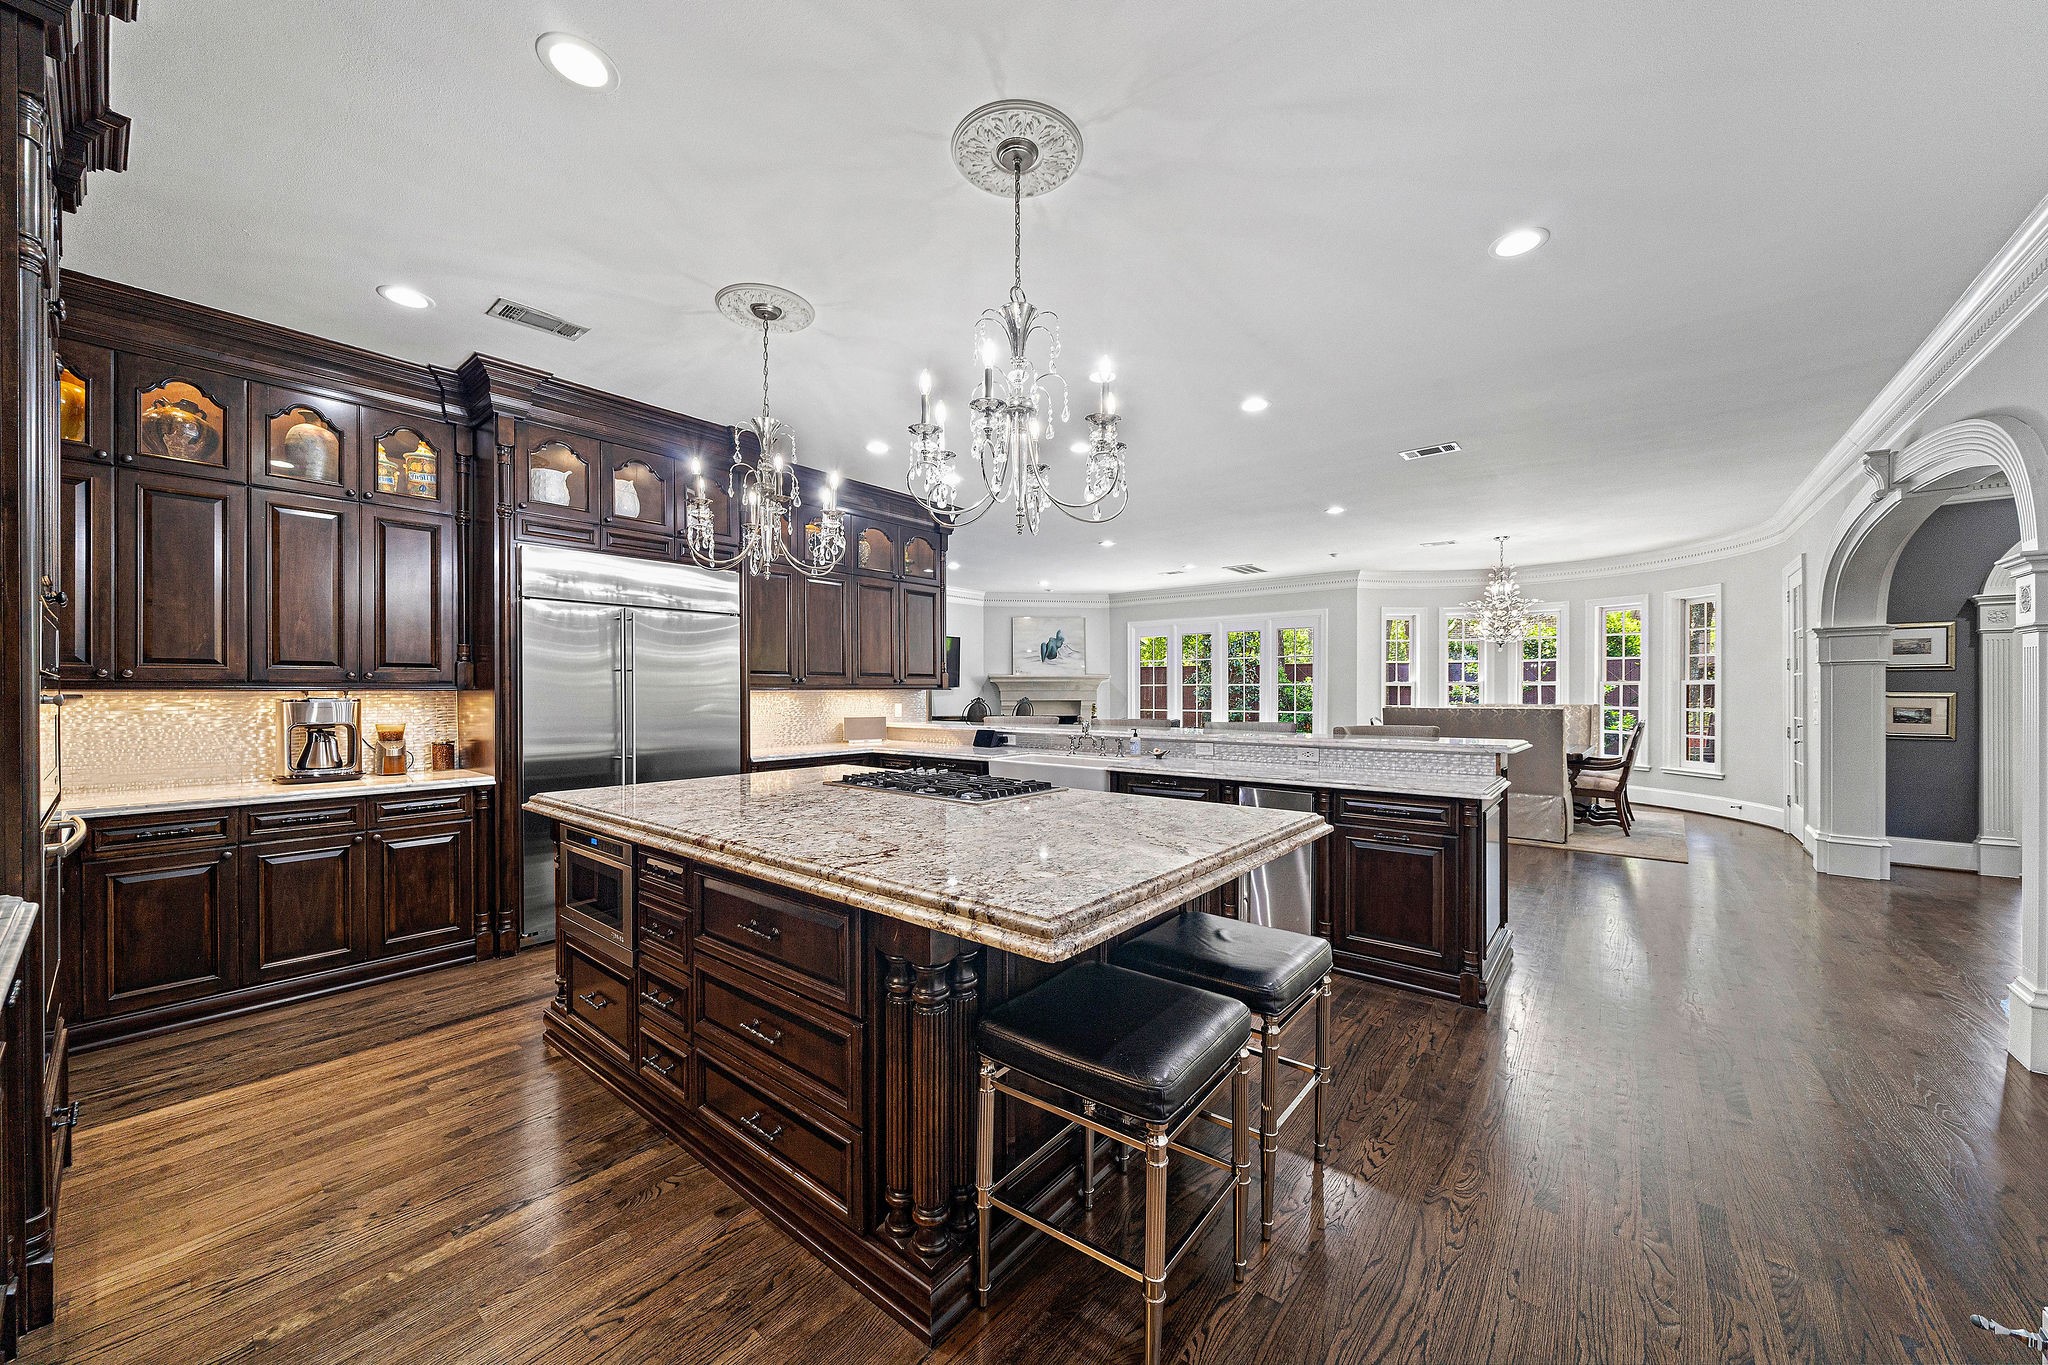 The Monogram built-in refrigerator, Shaw farmhouse sink, trash compactor and crushed ice maker are the finishing touches in this dream kitchen.